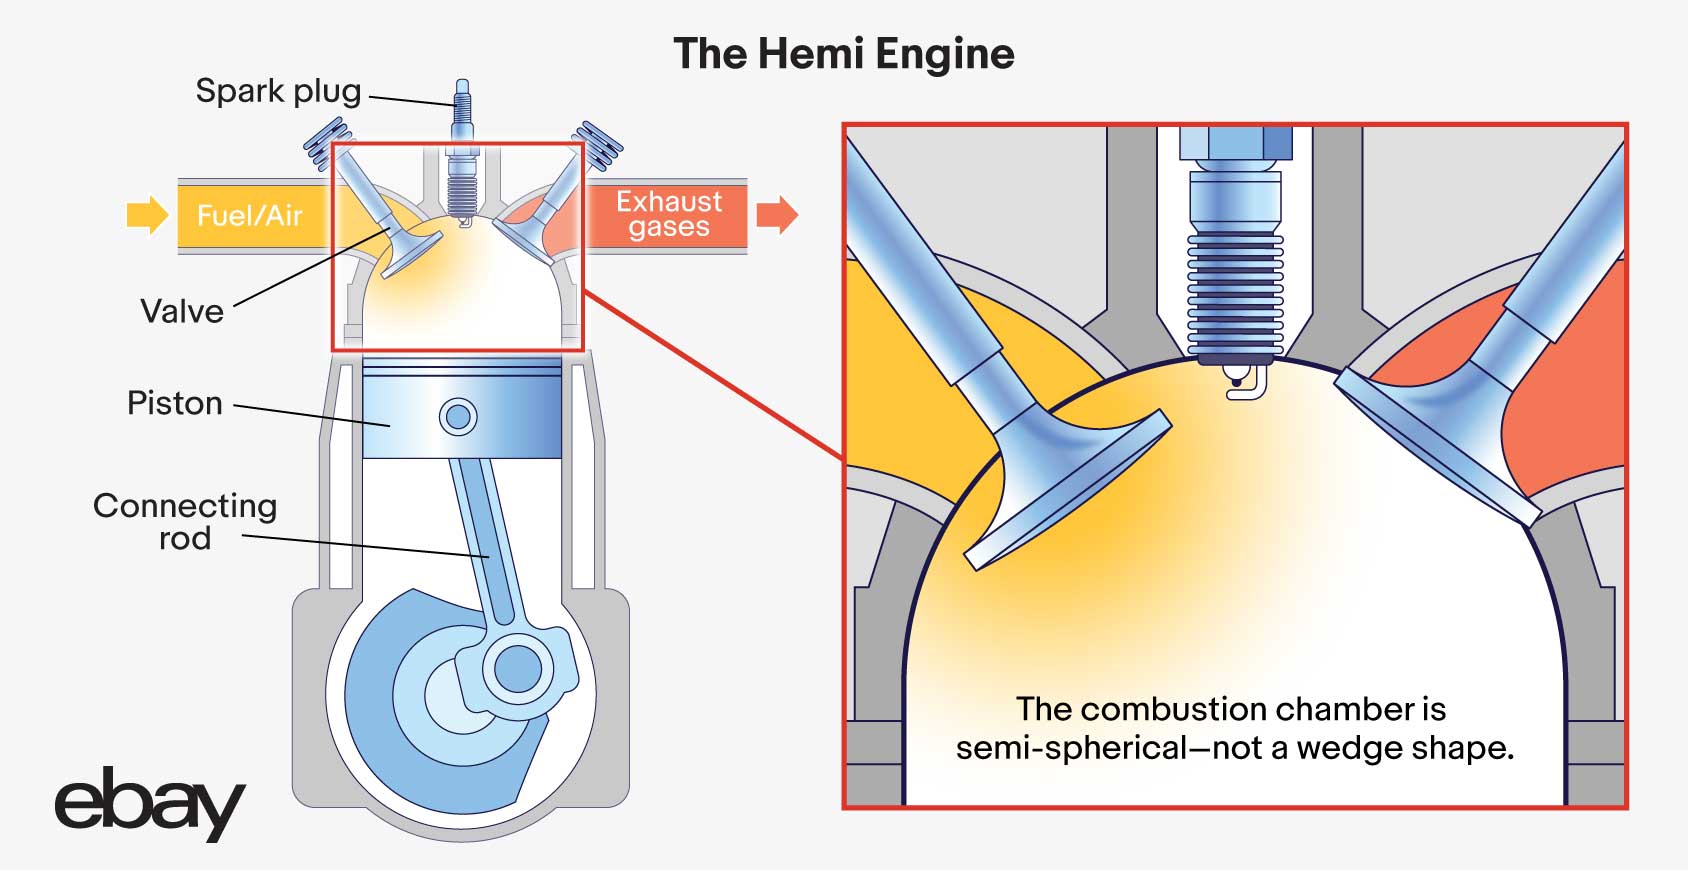 Illustration showing components of a hemi engine